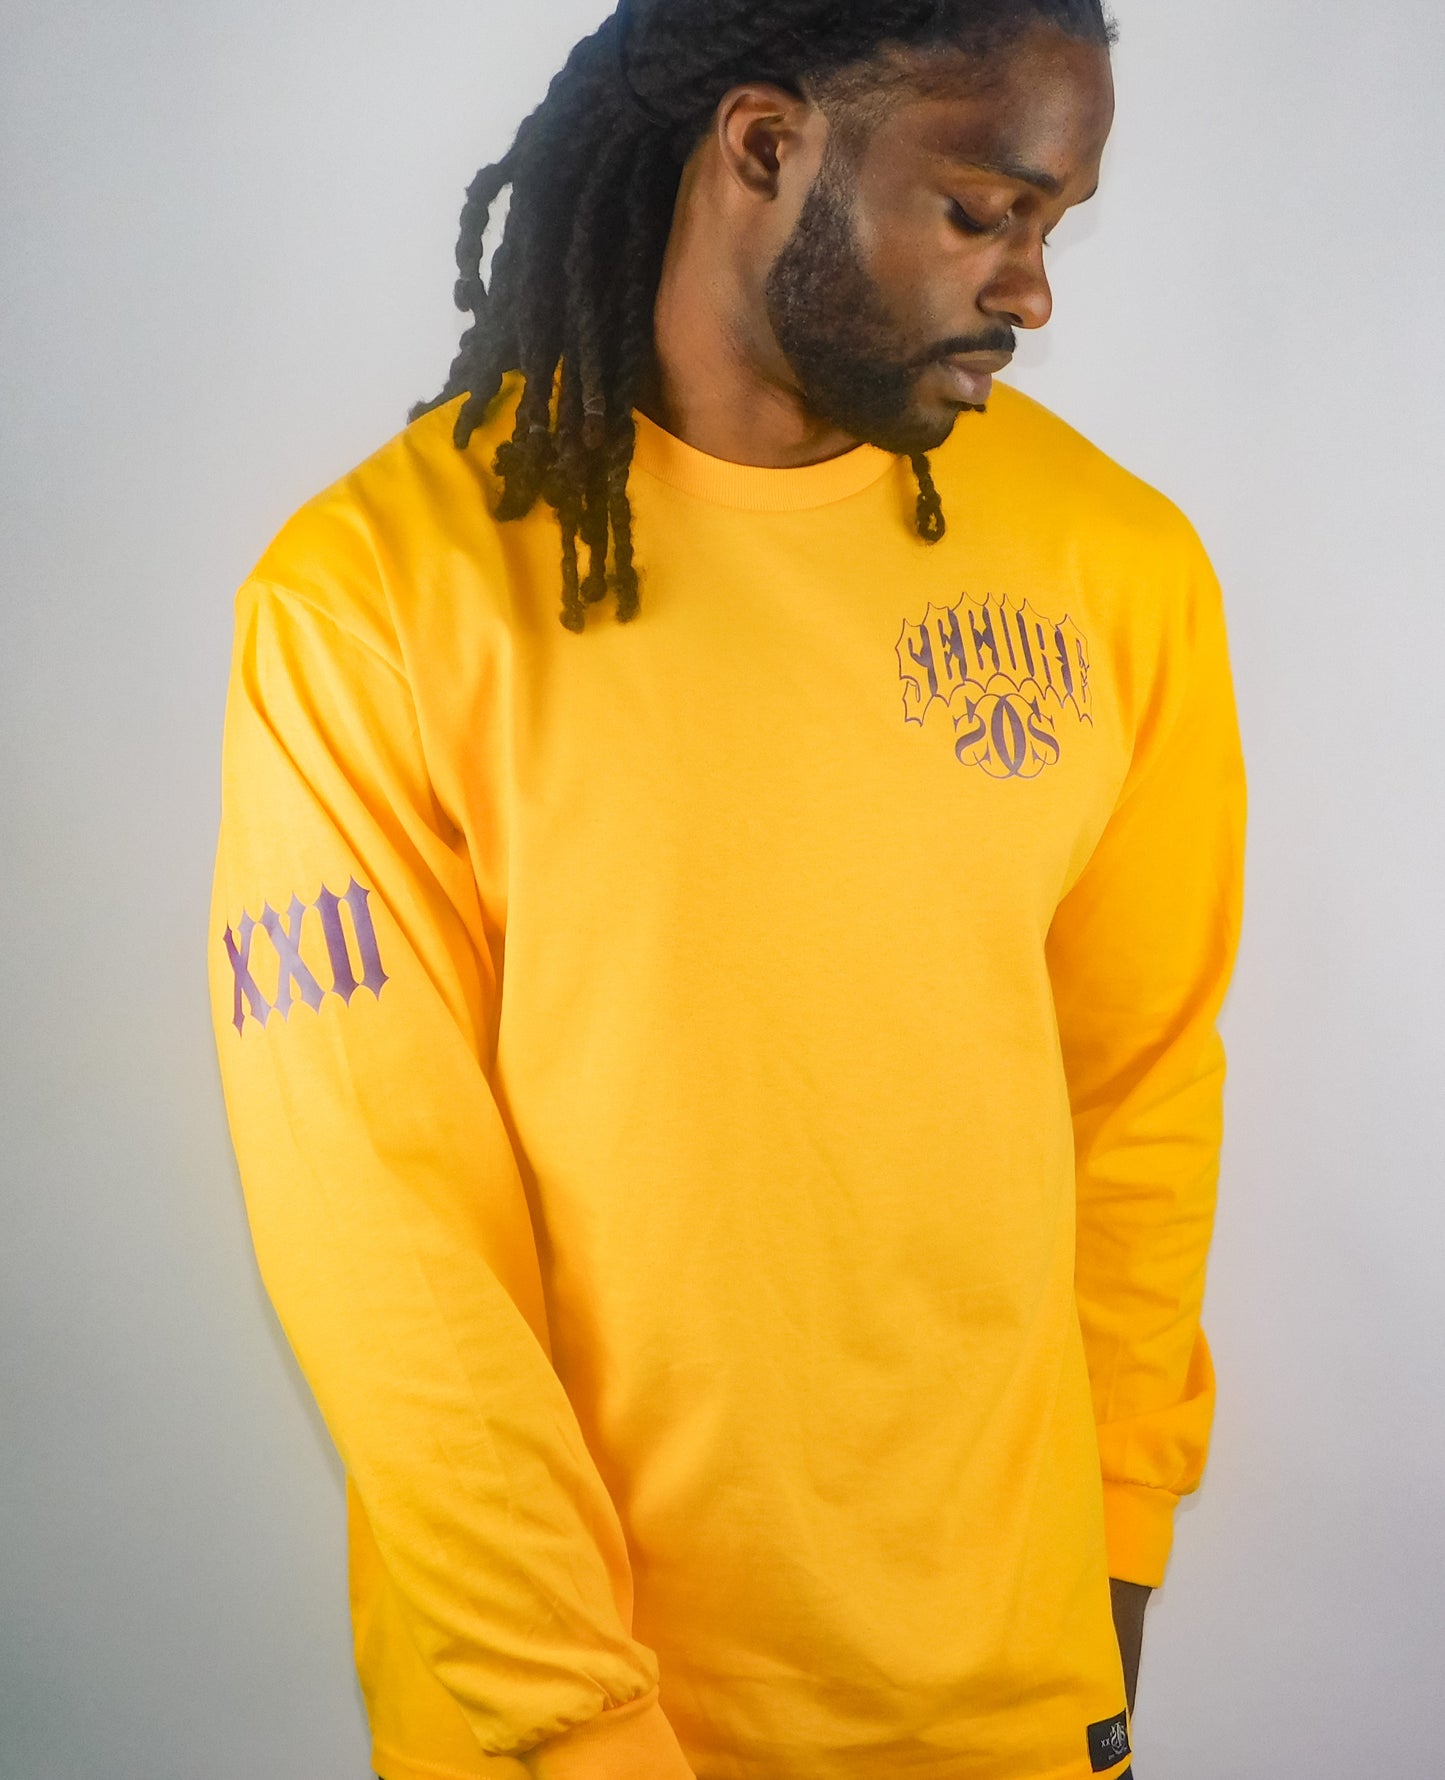 Ironwood L/S/Tee - Gold - Secure Cultures